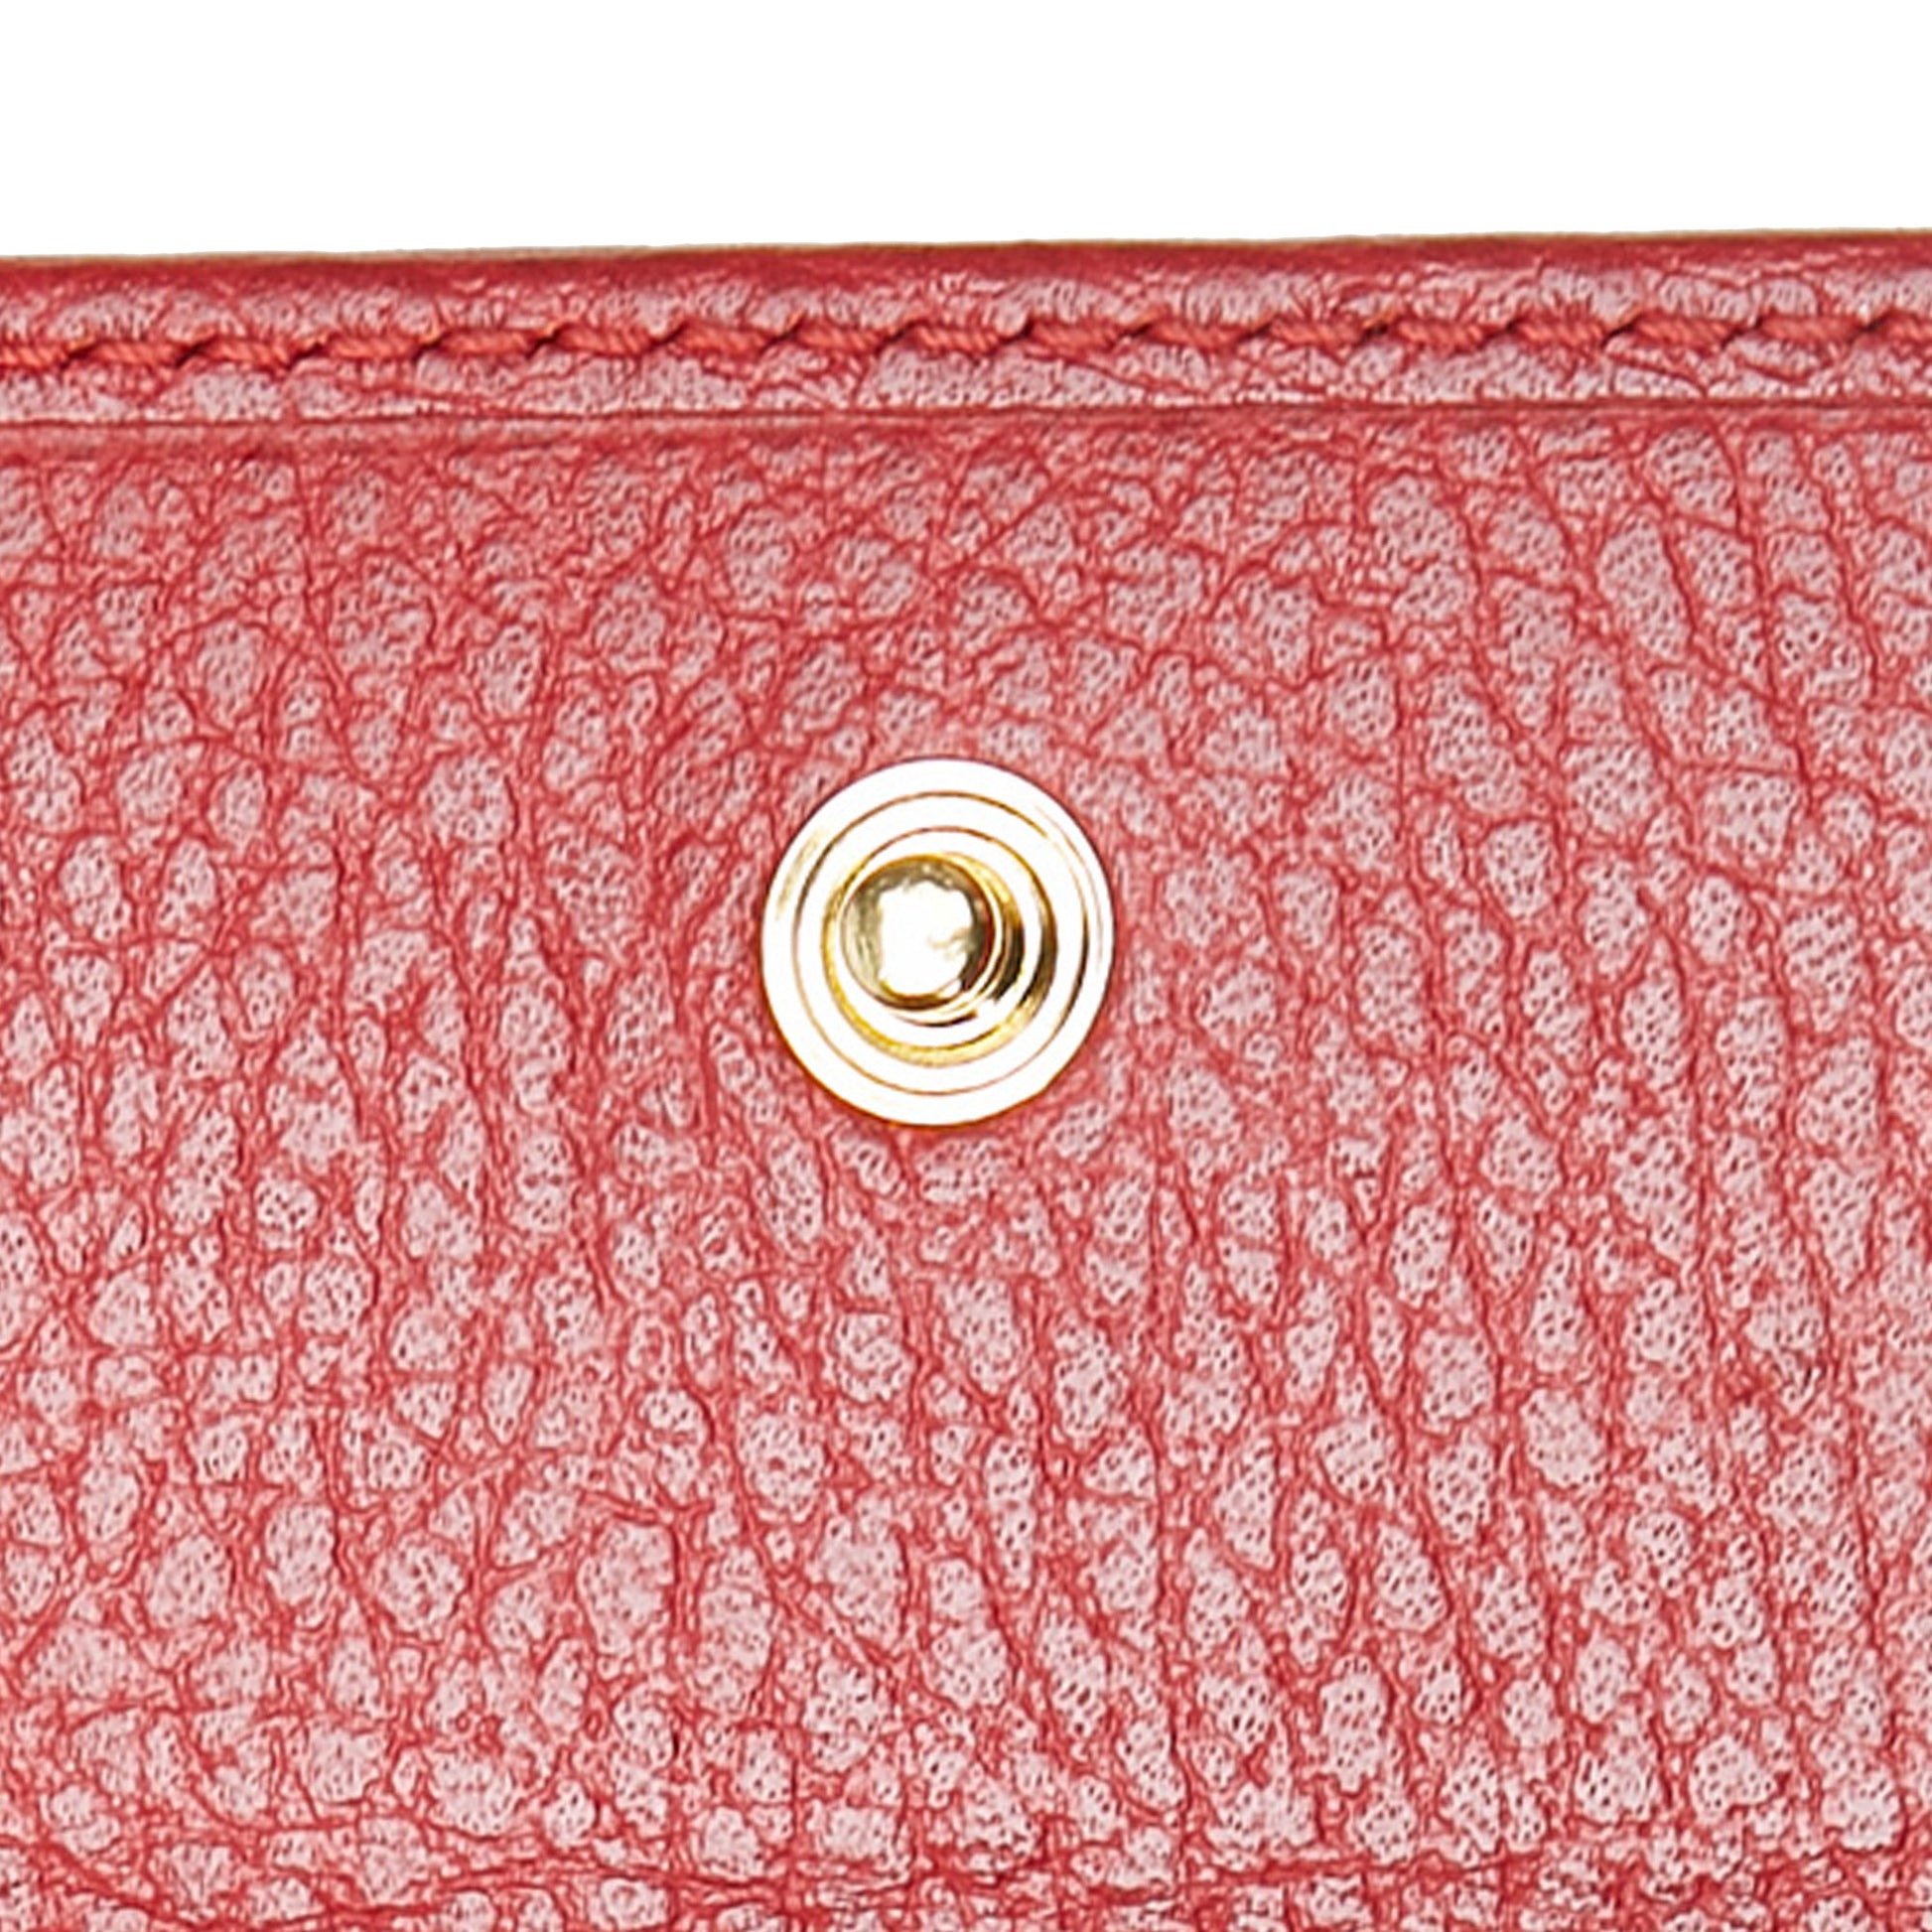 GG Marmont Leather Key Holder Red - Gaby Paris